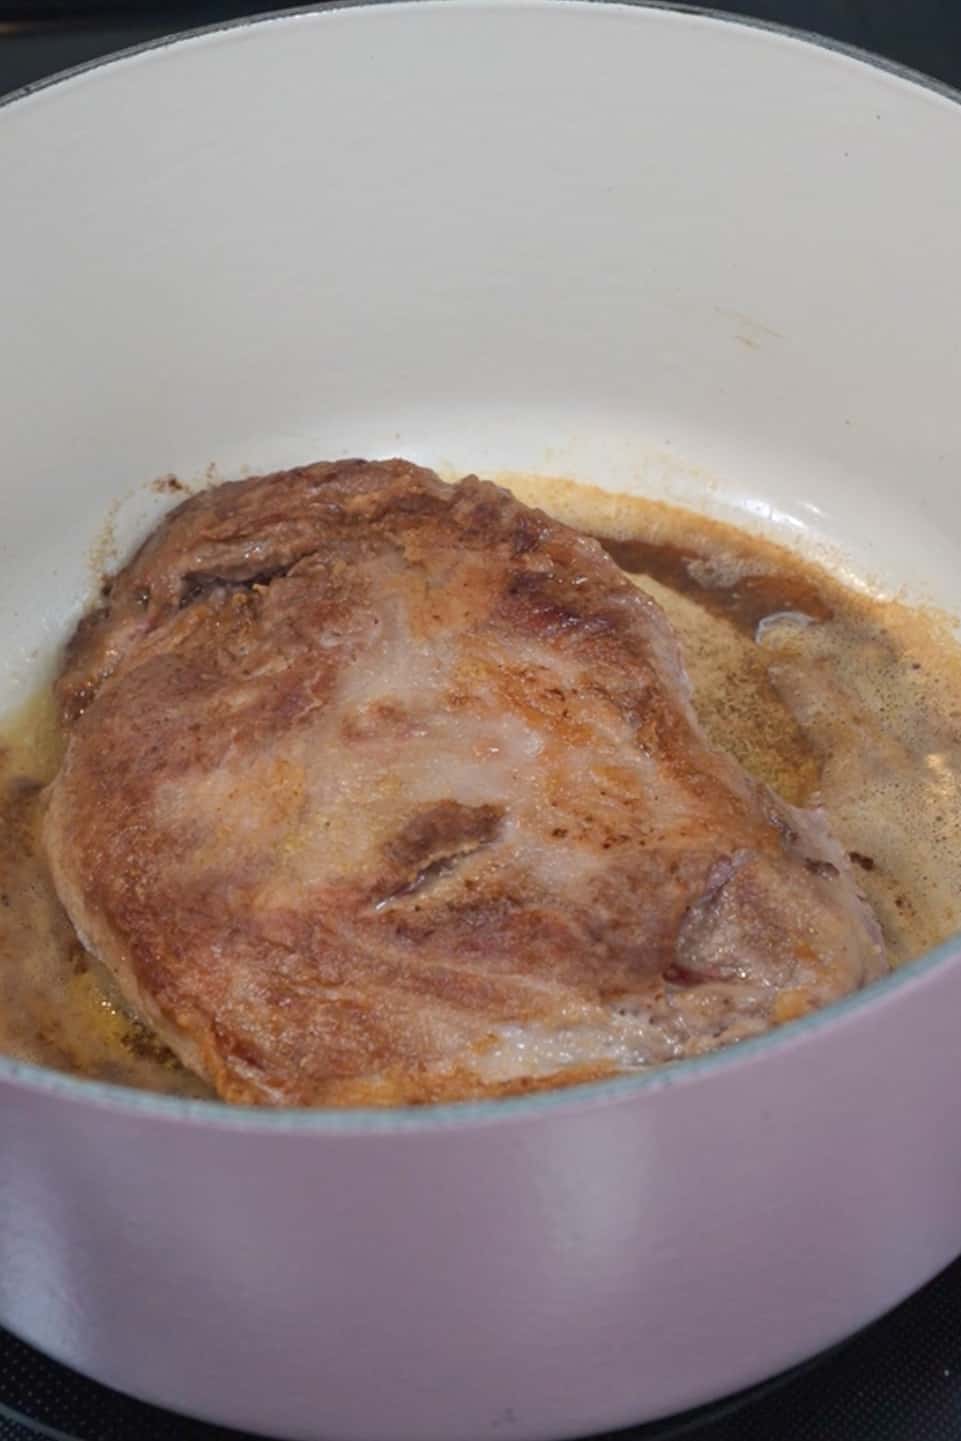 Preheat your oven to 325°F (163°C).
In a large bowl, combine the flour, salt, pepper, and garlic powder. Dredge the pork shoulder or butt in the flour mixture, ensuring it's well-coated.
In a large Dutch oven or oven-safe pot, heat the butter and olive oil over medium-high heat. Brown the pork on all sides until it develops a golden crust. This step helps seal in the juices.
